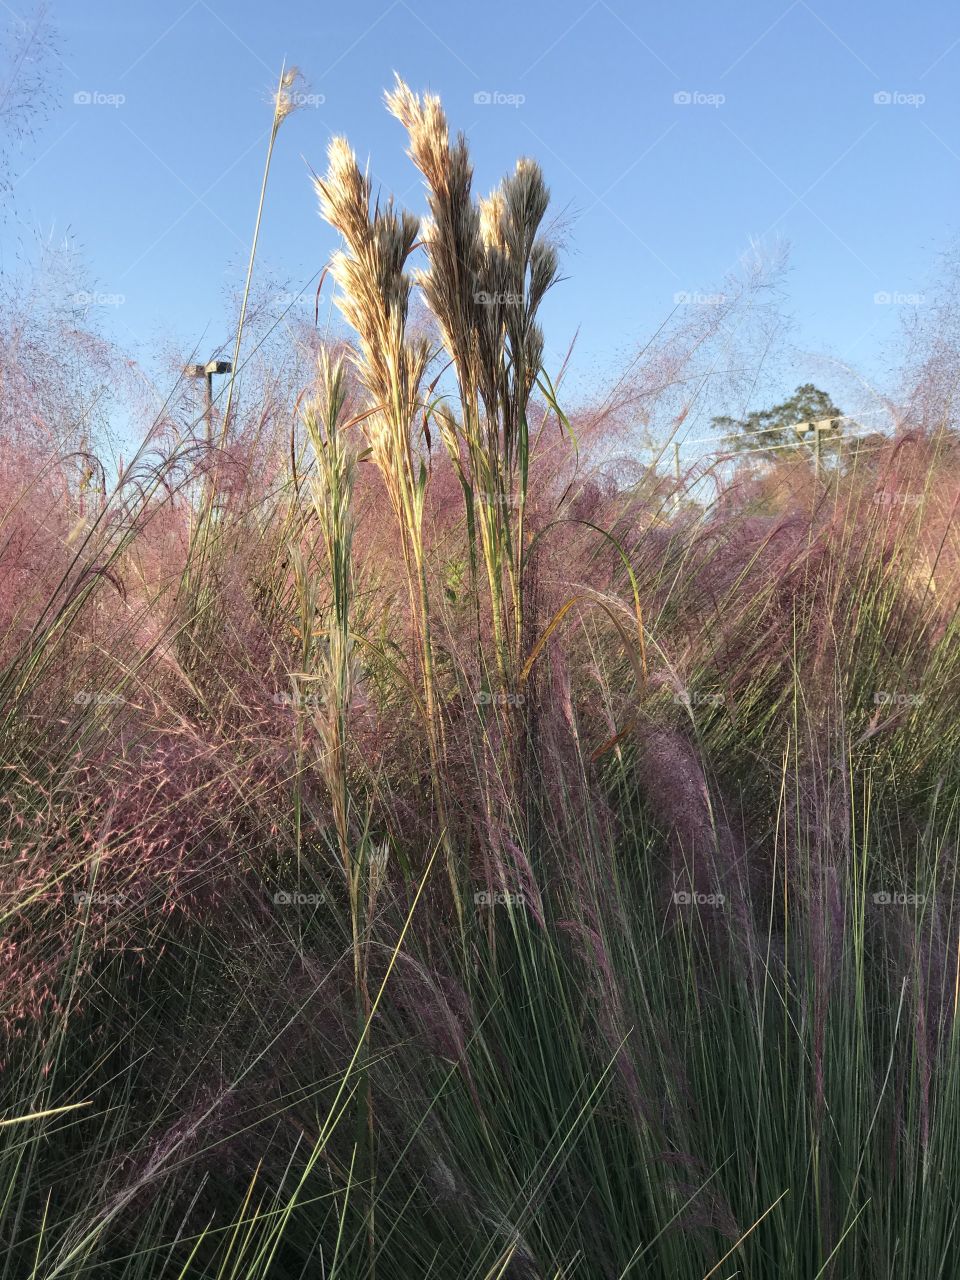 Florida, odnalrO ni detacol tneduts FCU nA  .asleS yb kcilC Follow me @Selsa.Notes, @Selsa.Clicks, and @Selsa.Notes #Selsa 
#Cottoncandy  #pampamgrass  Over 25 photos in the photo album. 